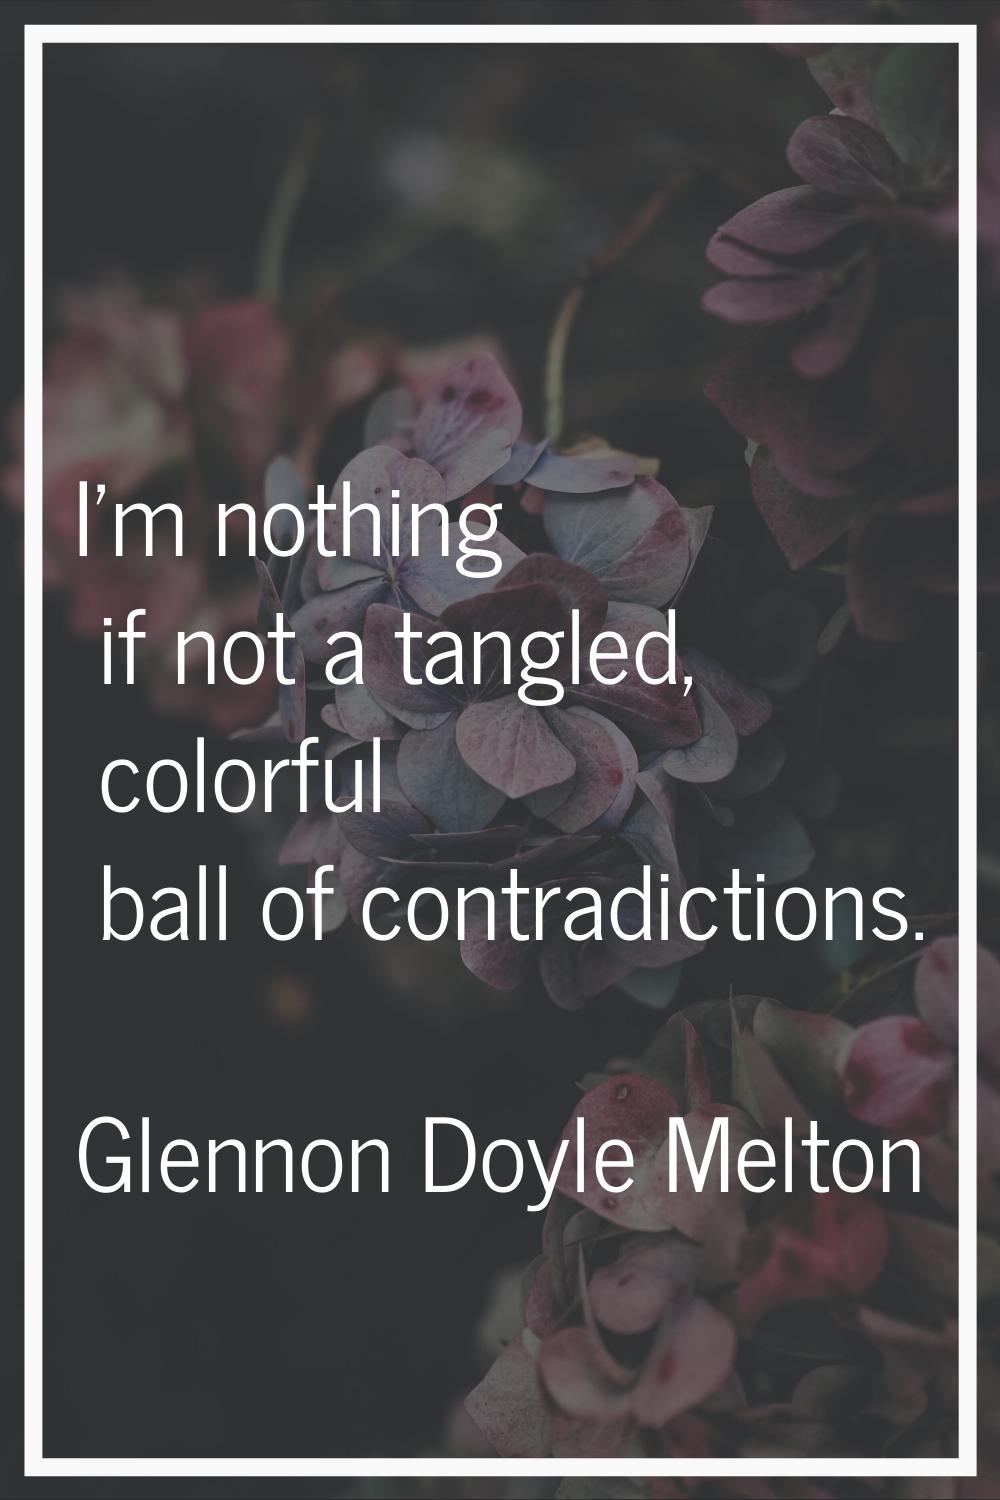 I'm nothing if not a tangled, colorful ball of contradictions.